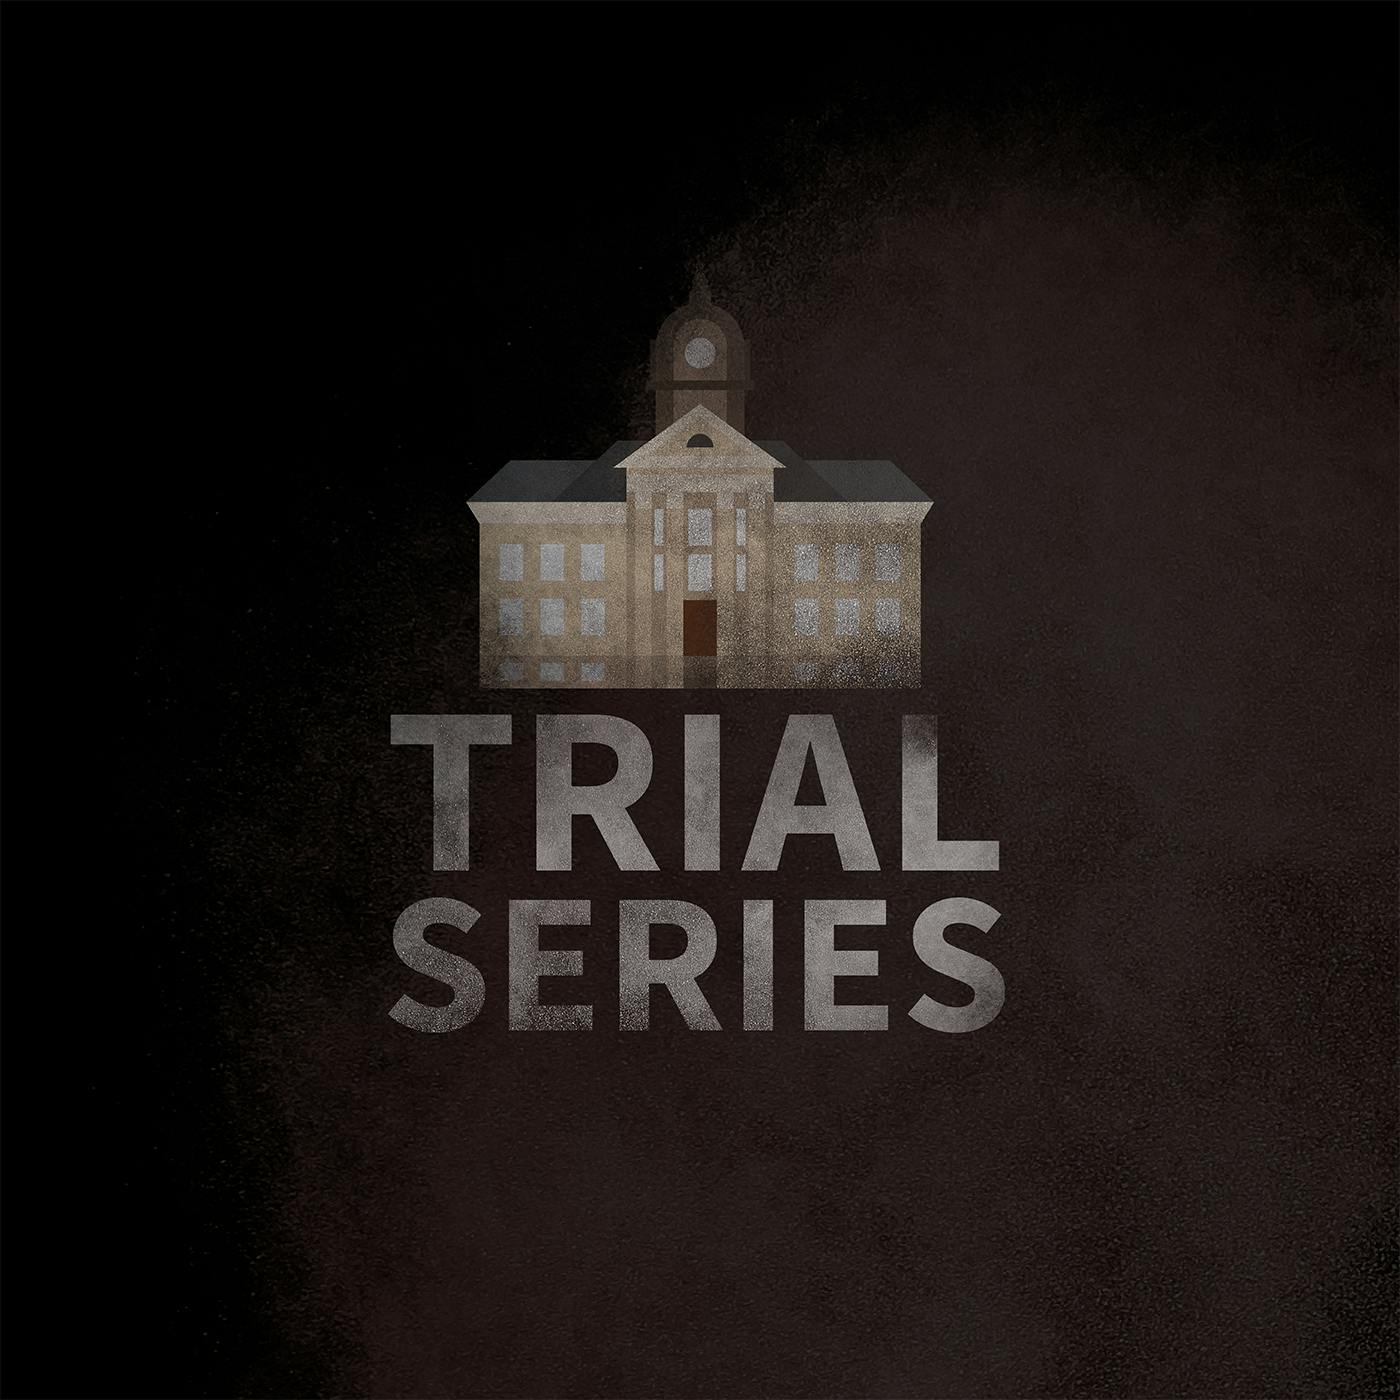 The Trial Series: What's next?